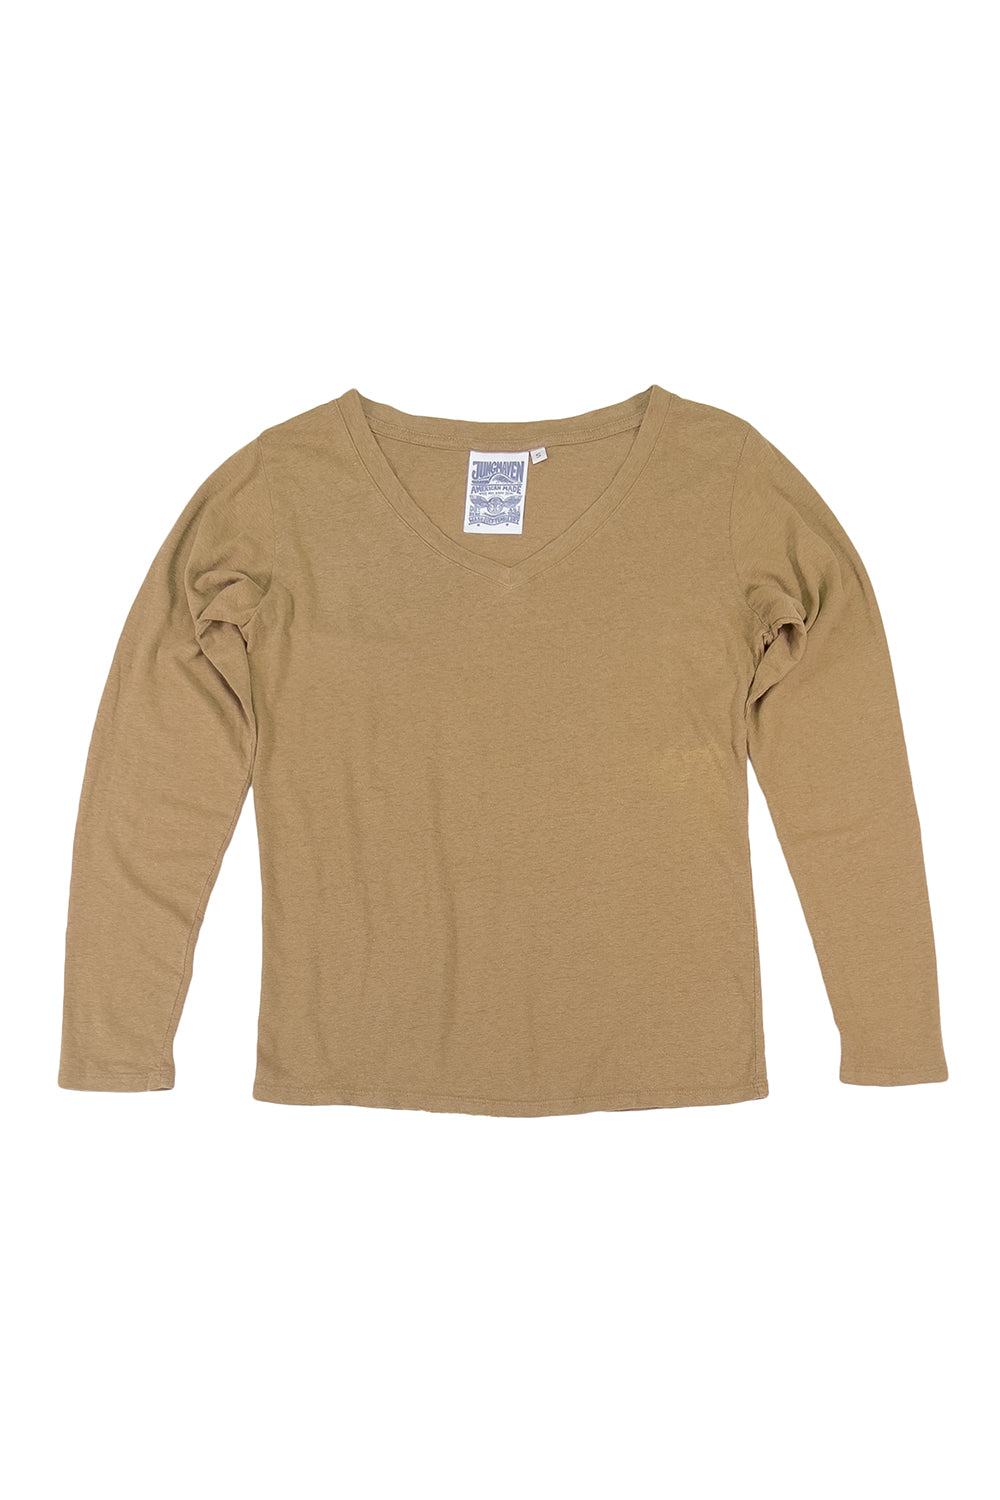 Finch Long Sleeve V-neck | Jungmaven Hemp Clothing & Accessories / Color: Coyote